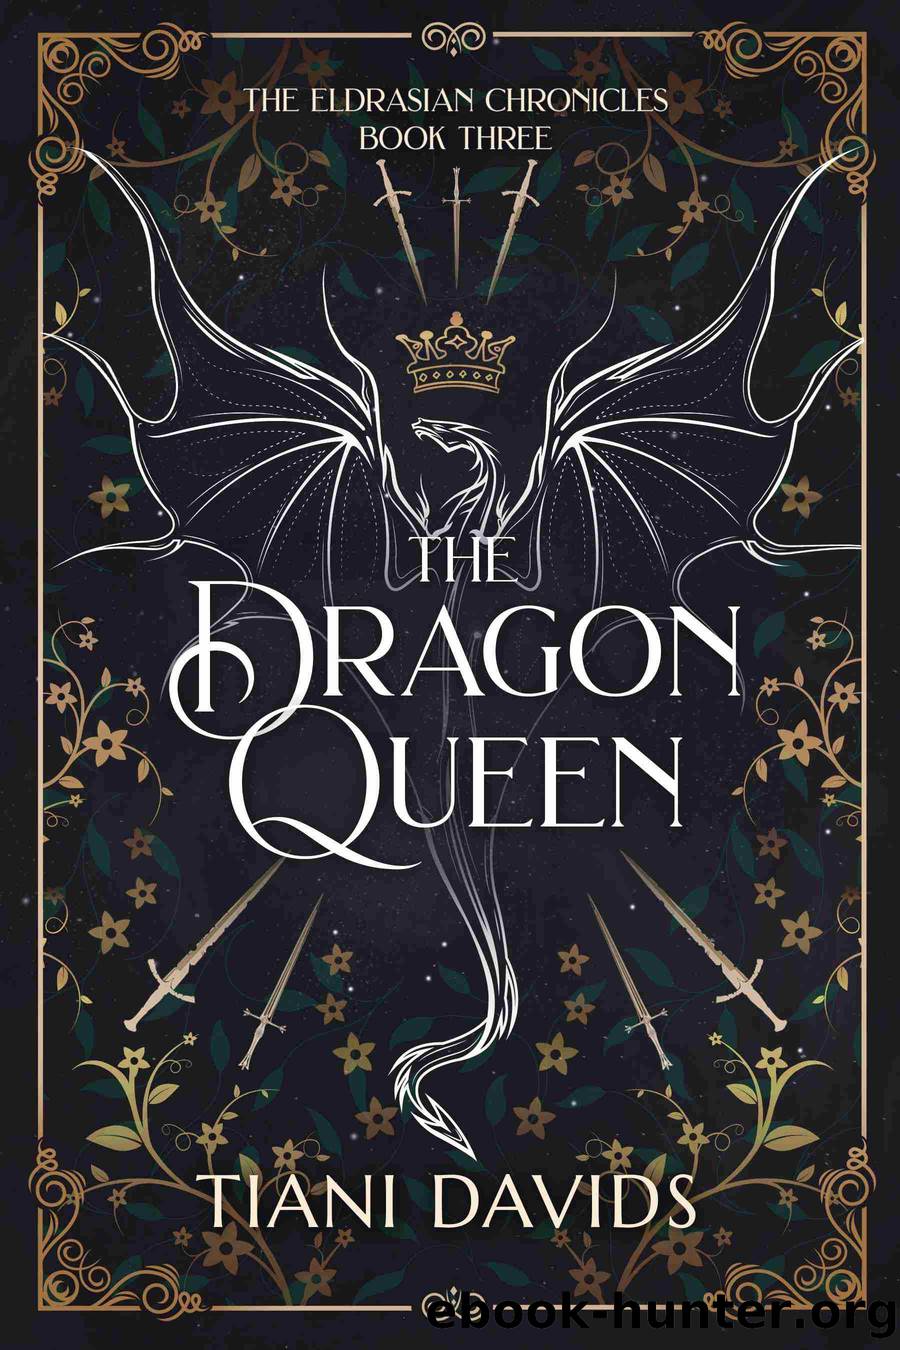 The Dragon Queen by Tiani Davids